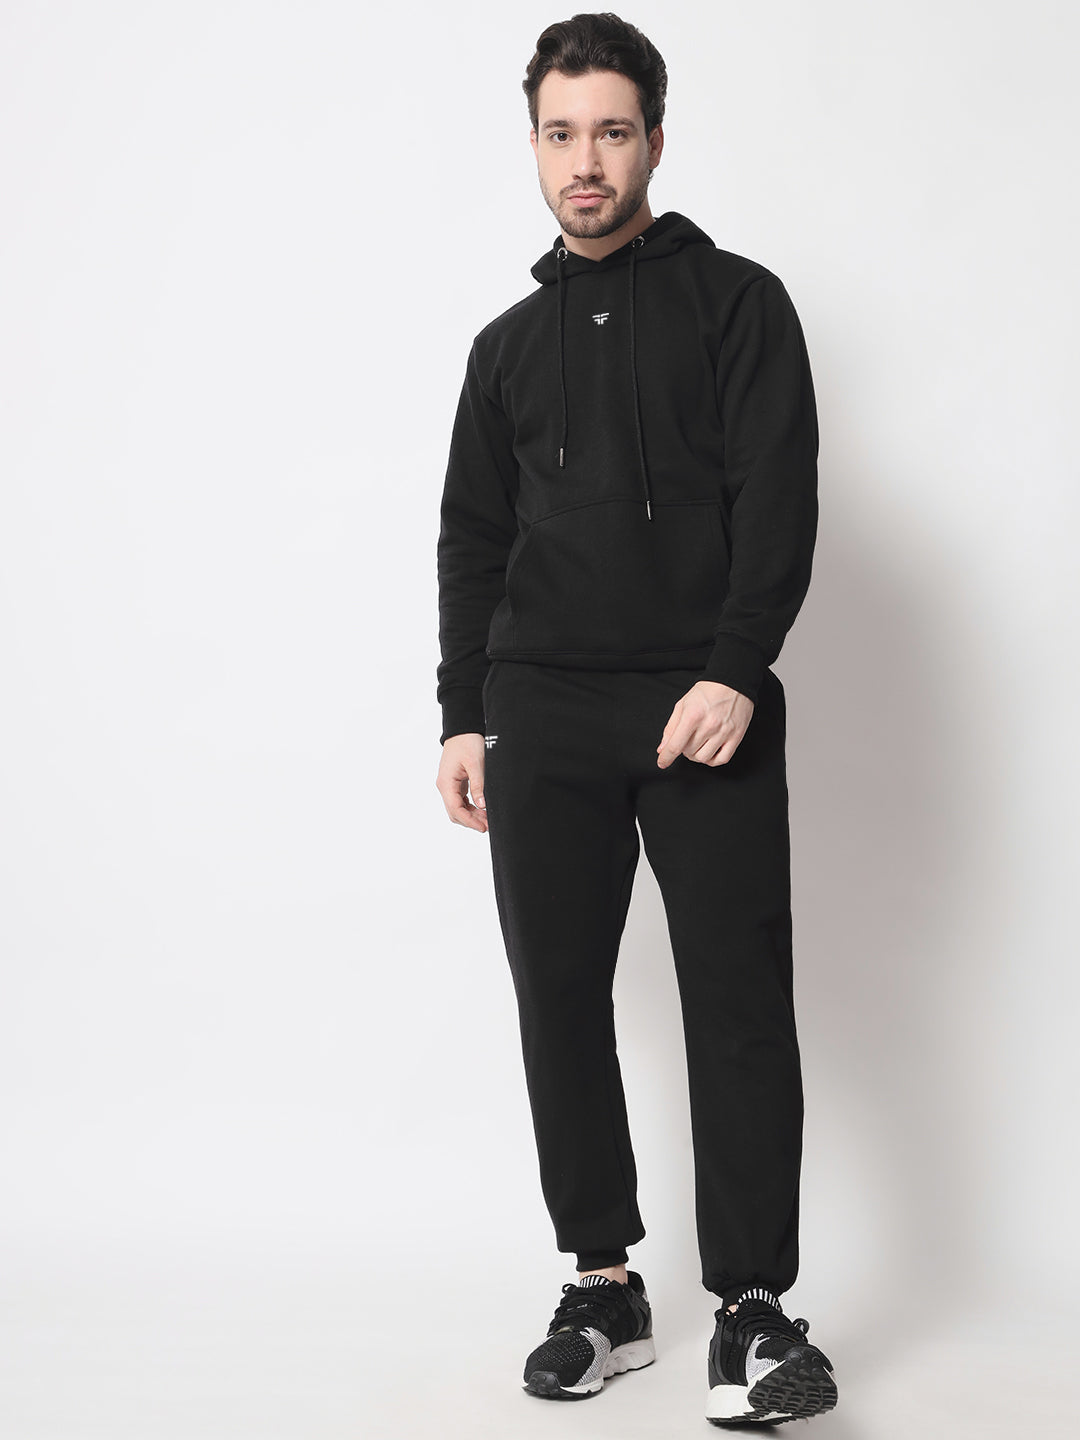 Black Thermal Co-ord Set (Hoodie and Jogger Combo)